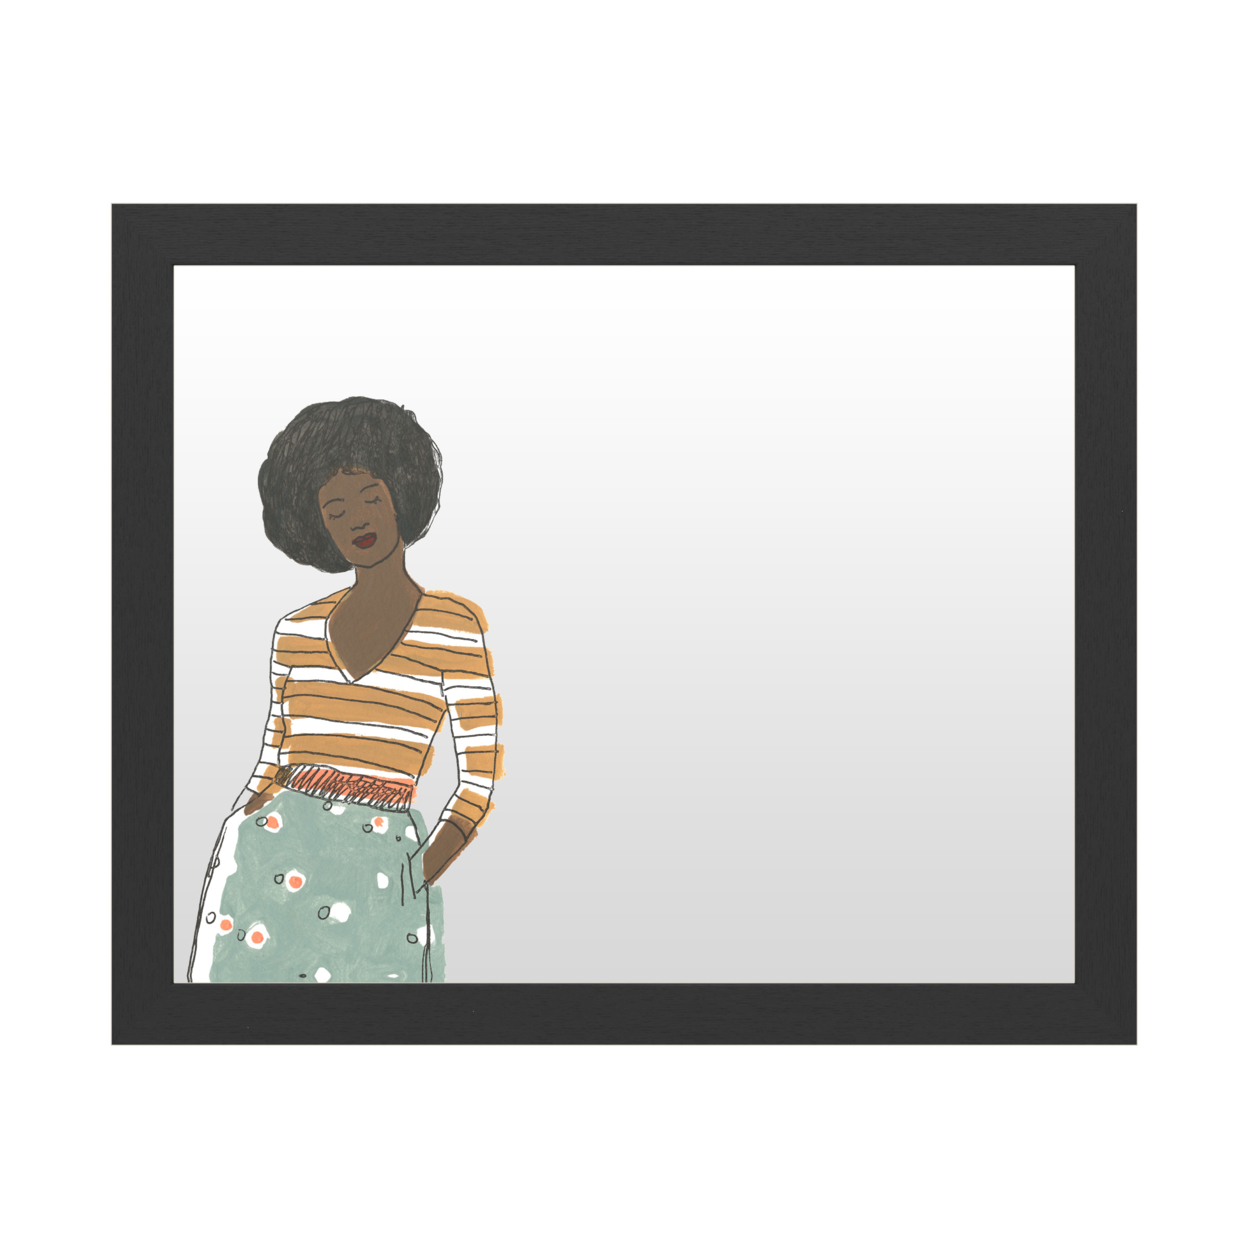 Dry Erase 16 X 20 Marker Board With Printed Artwork - June Erica Vess Fashion Vignette II White Board - Ready To Hang